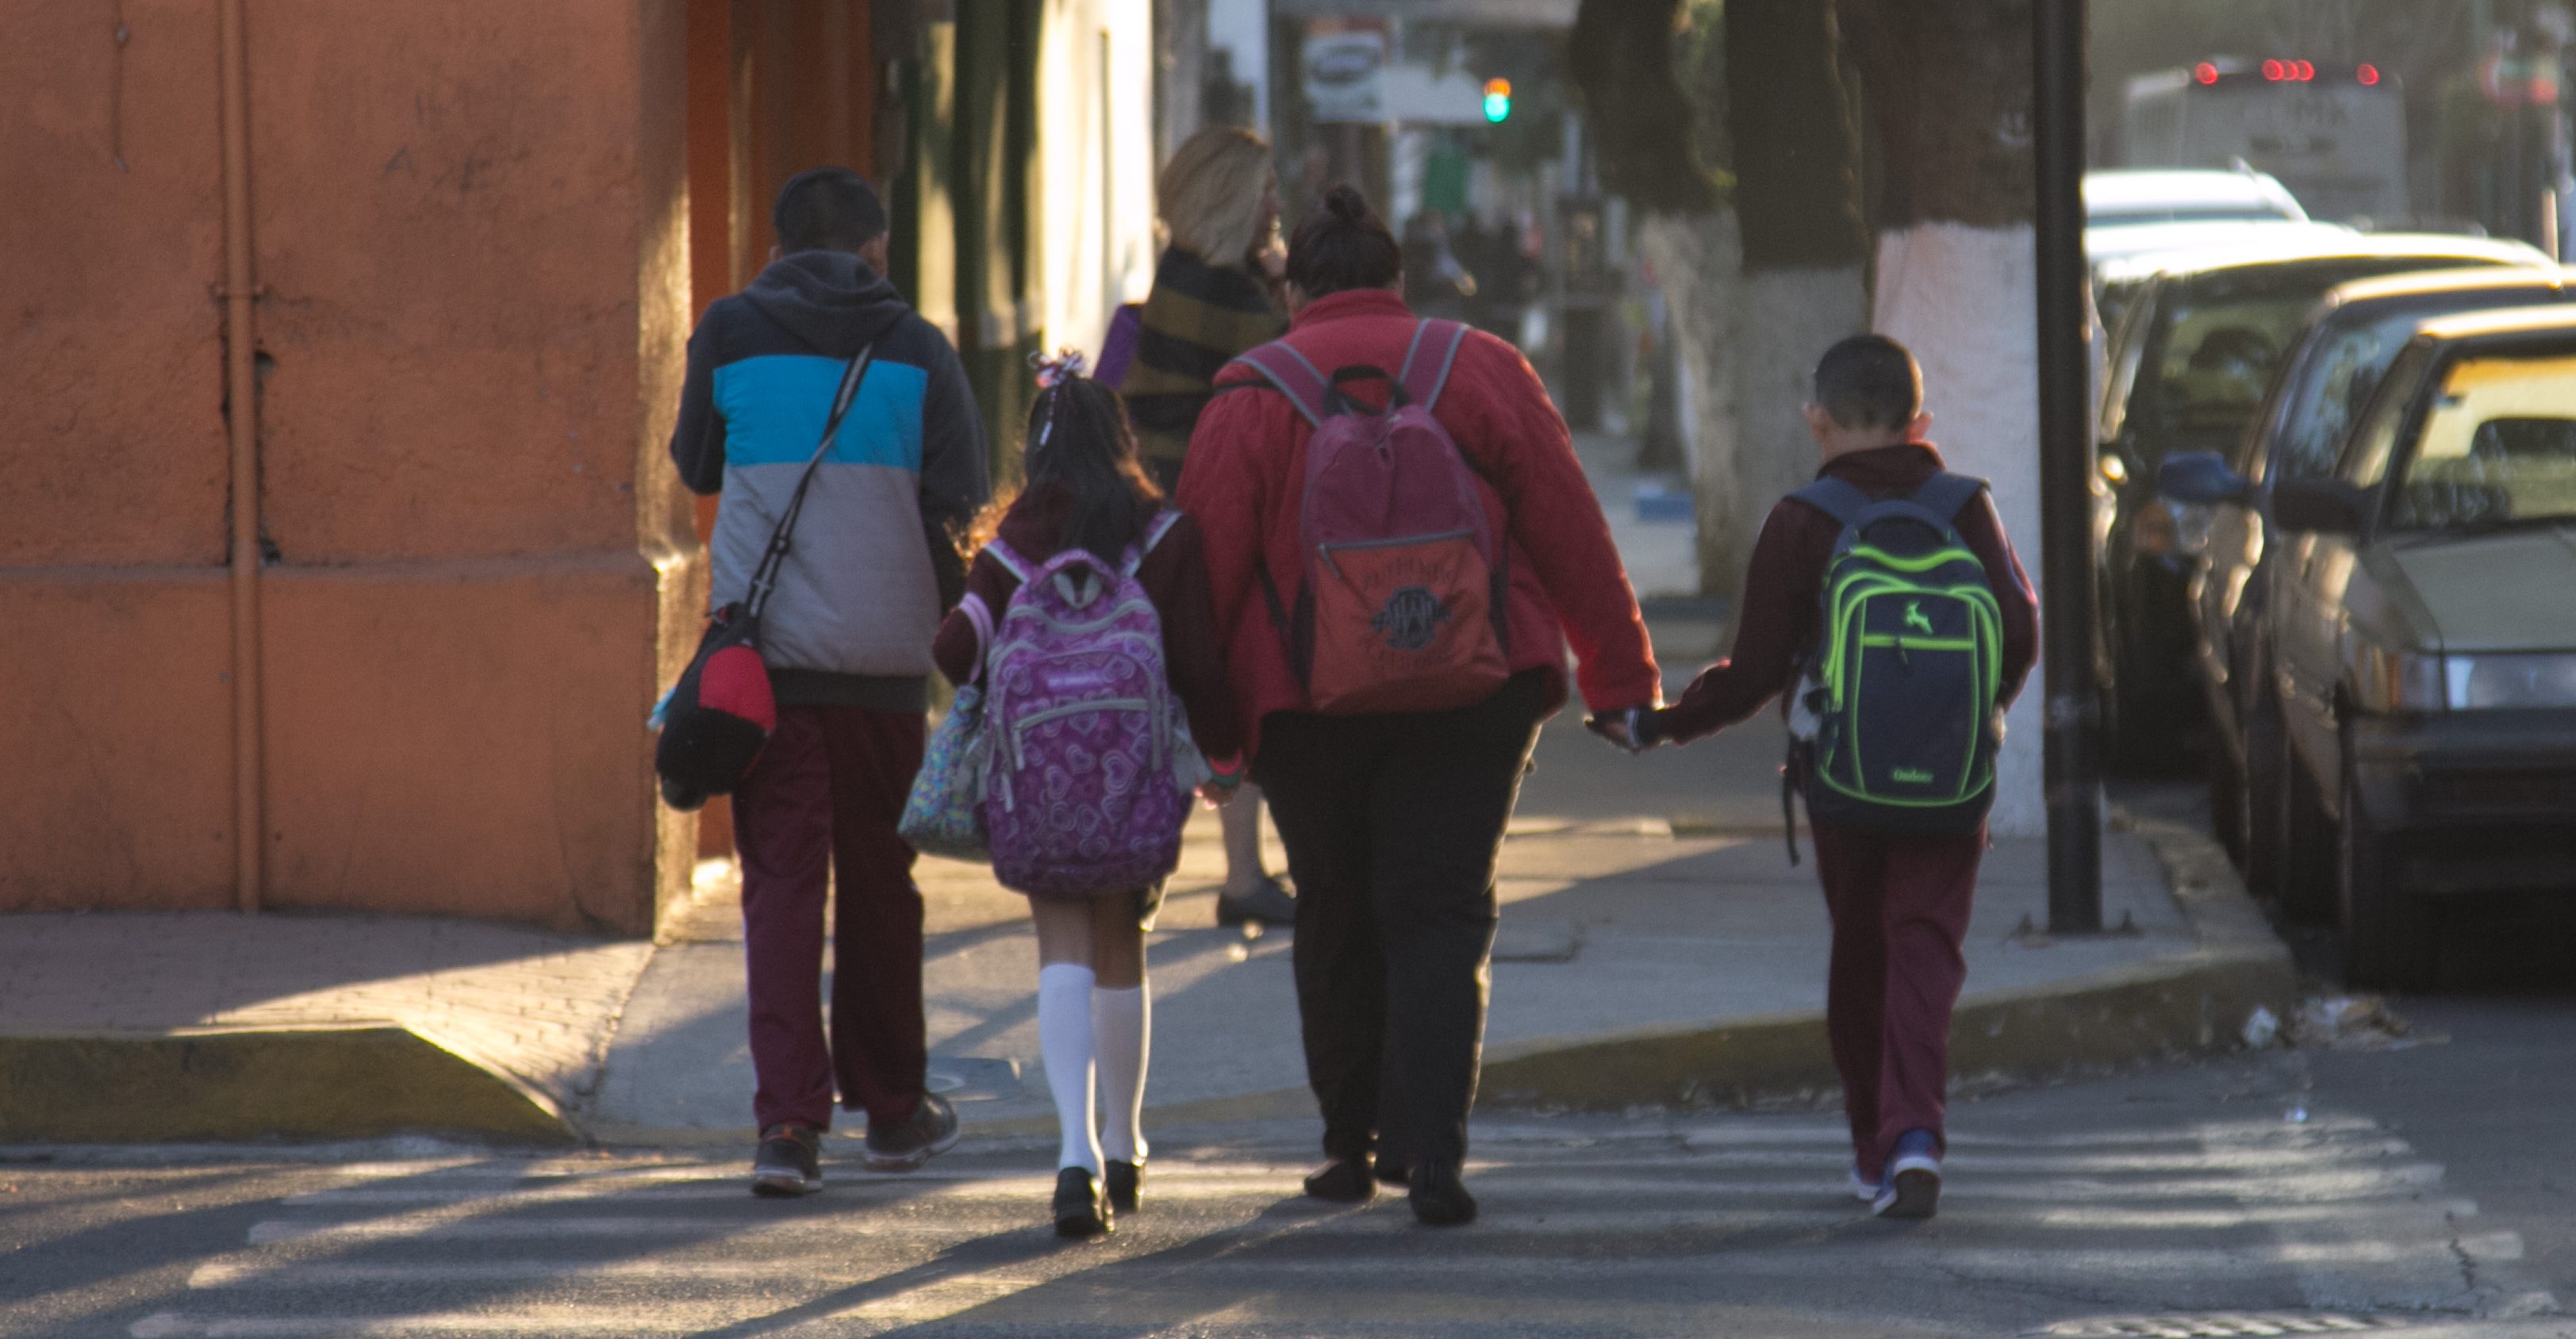 More than one million children can't go to school by poverty: Coneval